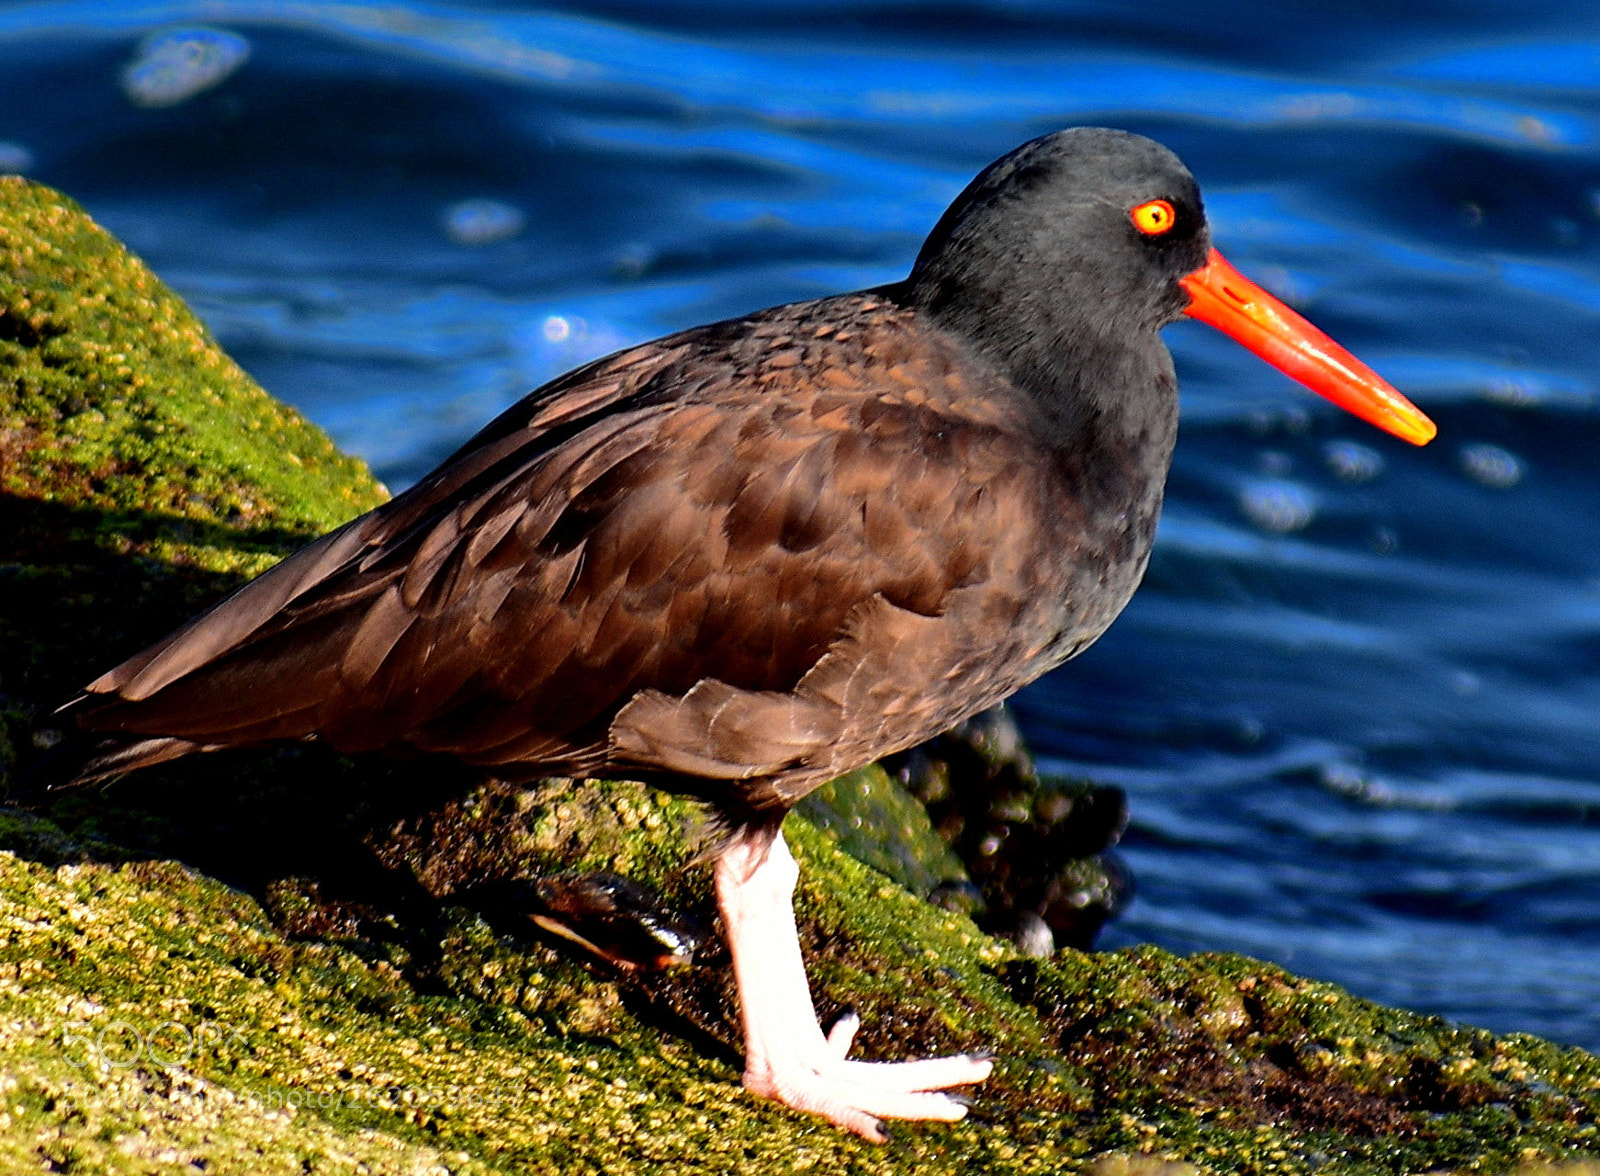 Nikon D7200 sample photo. Red oyster catcher looking photography